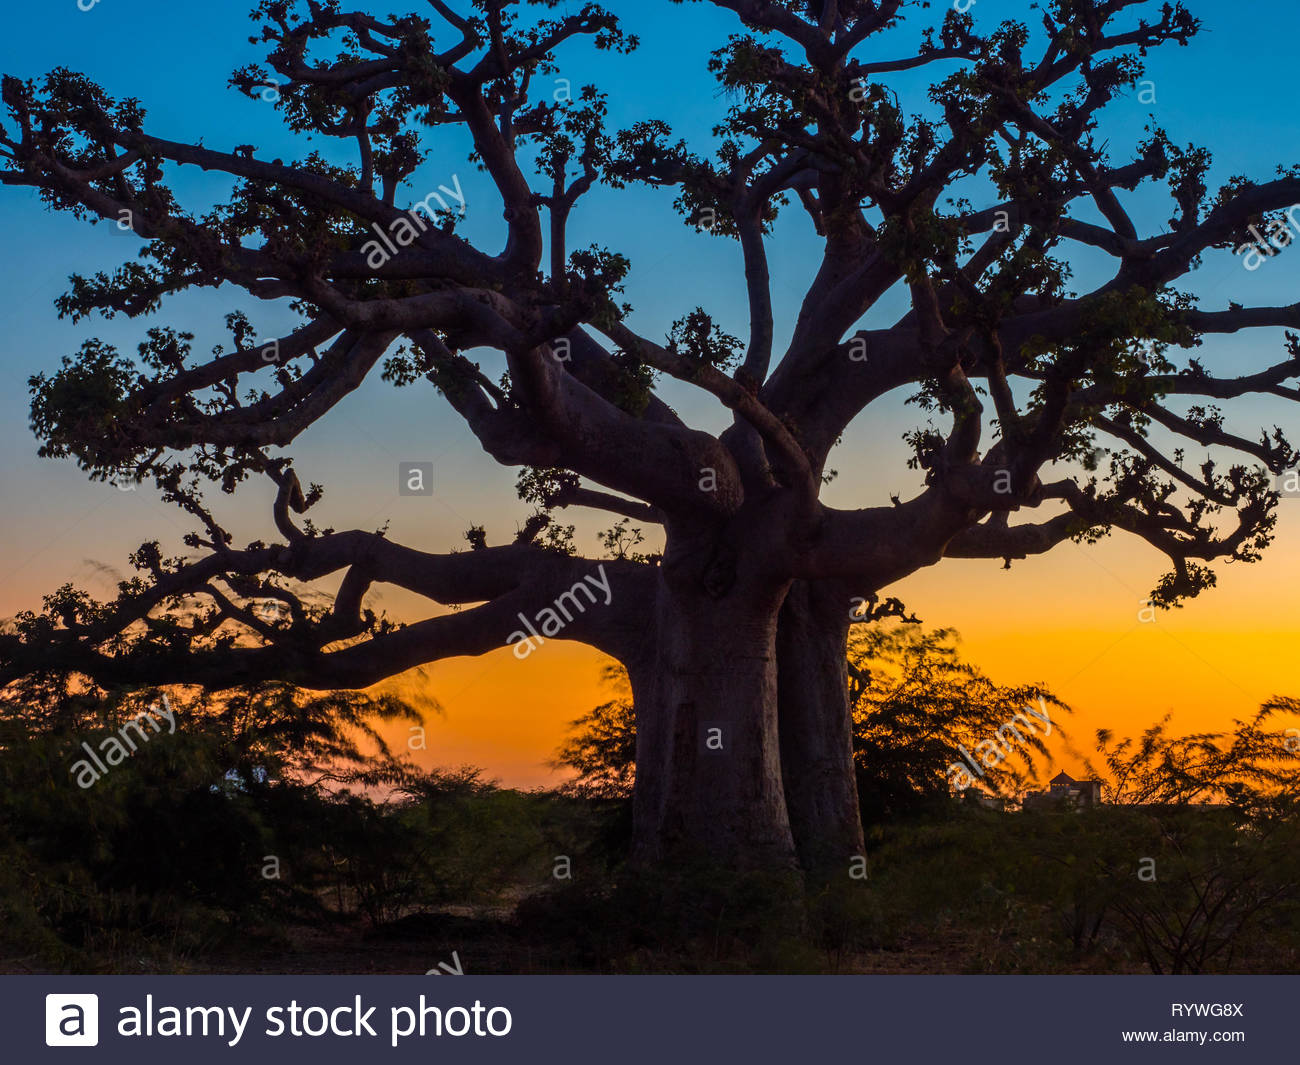 Silhouette Of Baobab Tree At Sunset With The Yellow Background